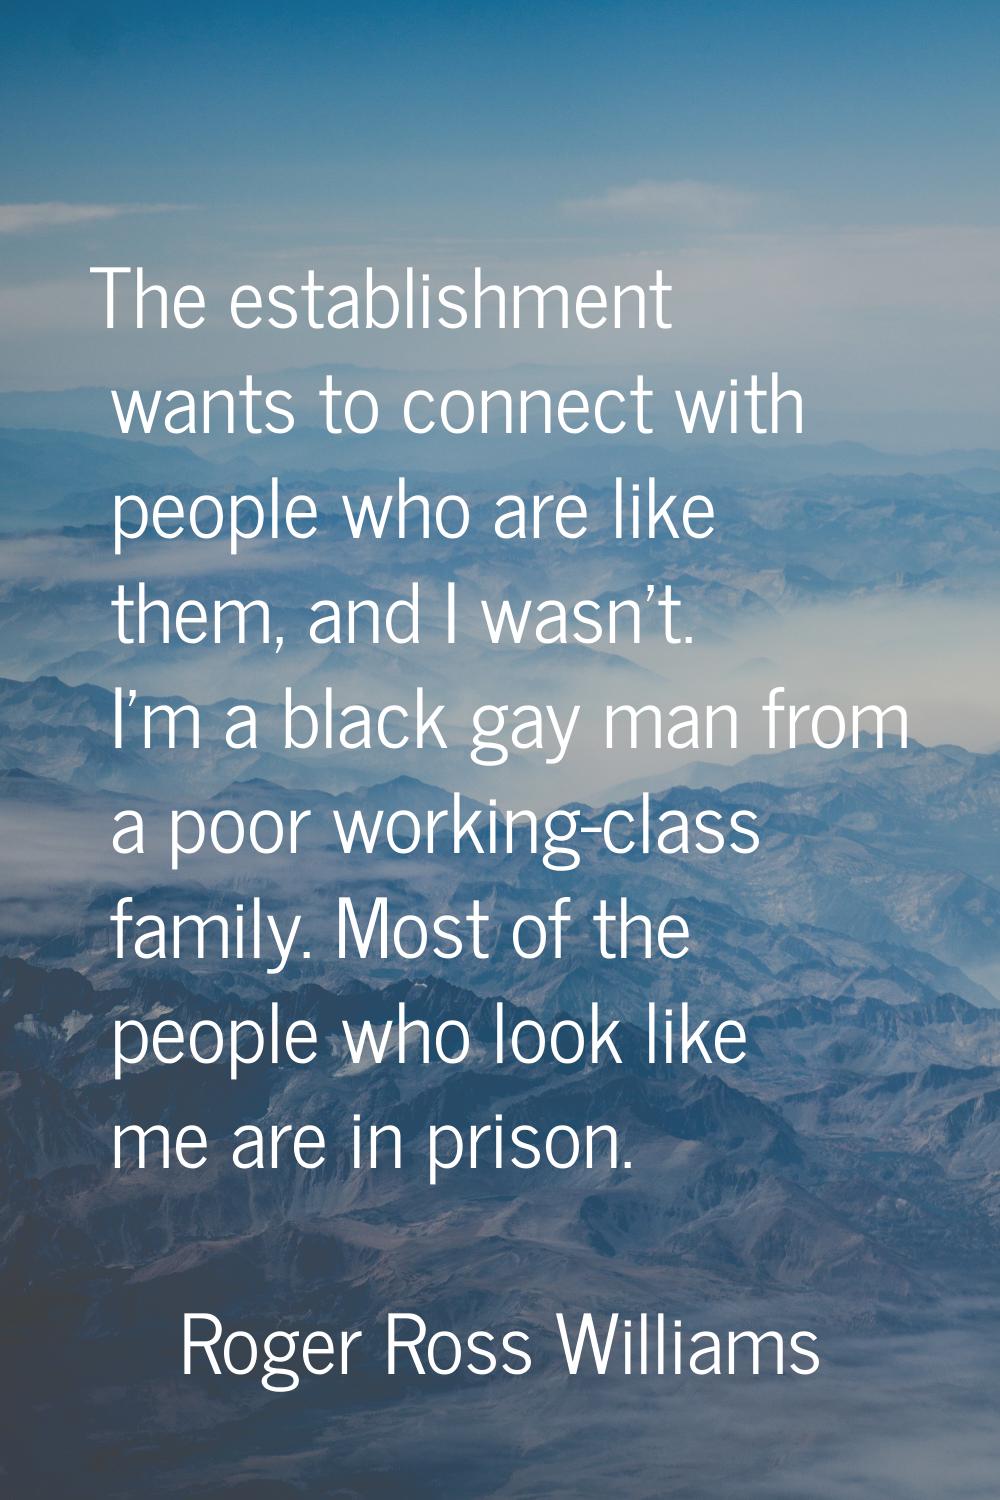 The establishment wants to connect with people who are like them, and I wasn't. I'm a black gay man